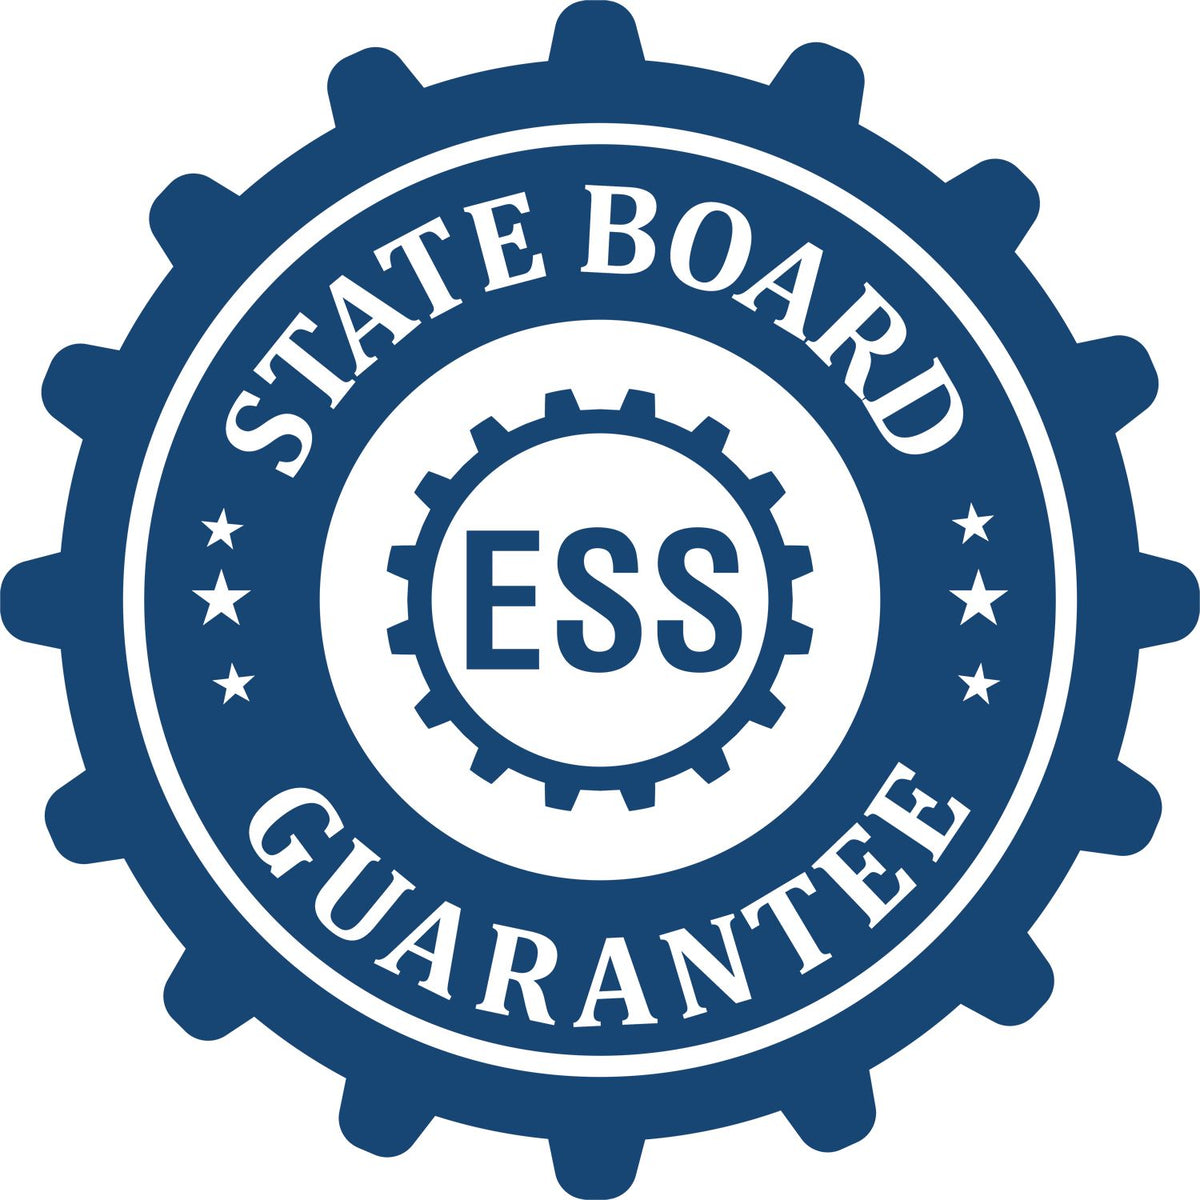 An emblem in a gear shape illustrating a state board guarantee for the Vermont Professional Engineer Seal Stamp product.